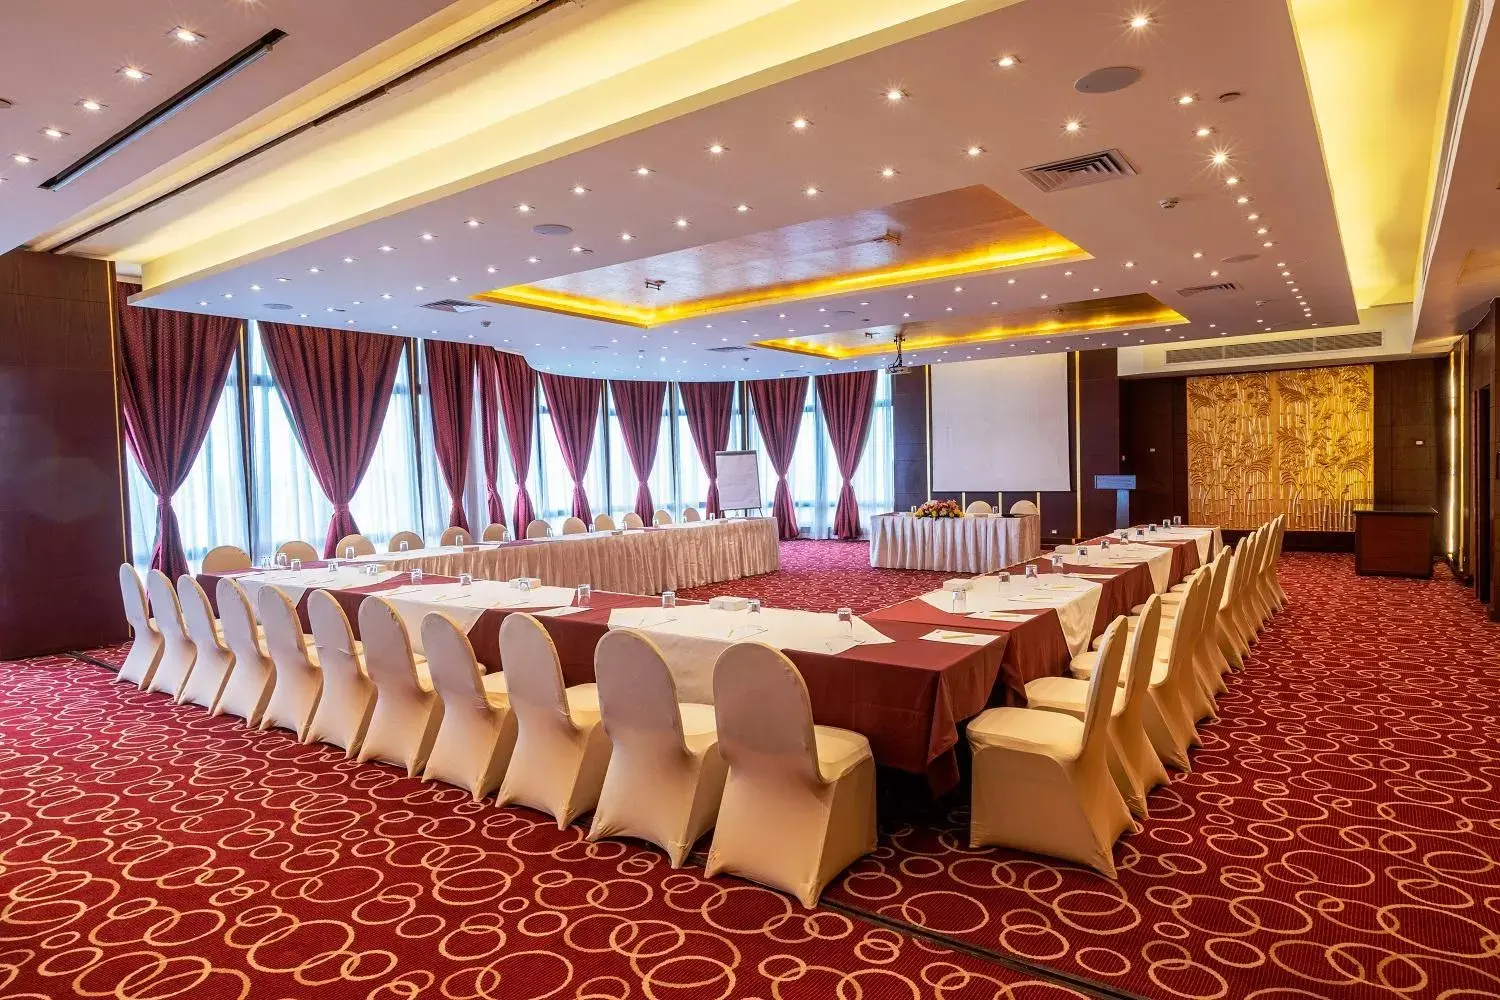 Meeting/conference room, Banquet Facilities in Golden Tulip Hotel Flamenco Cairo